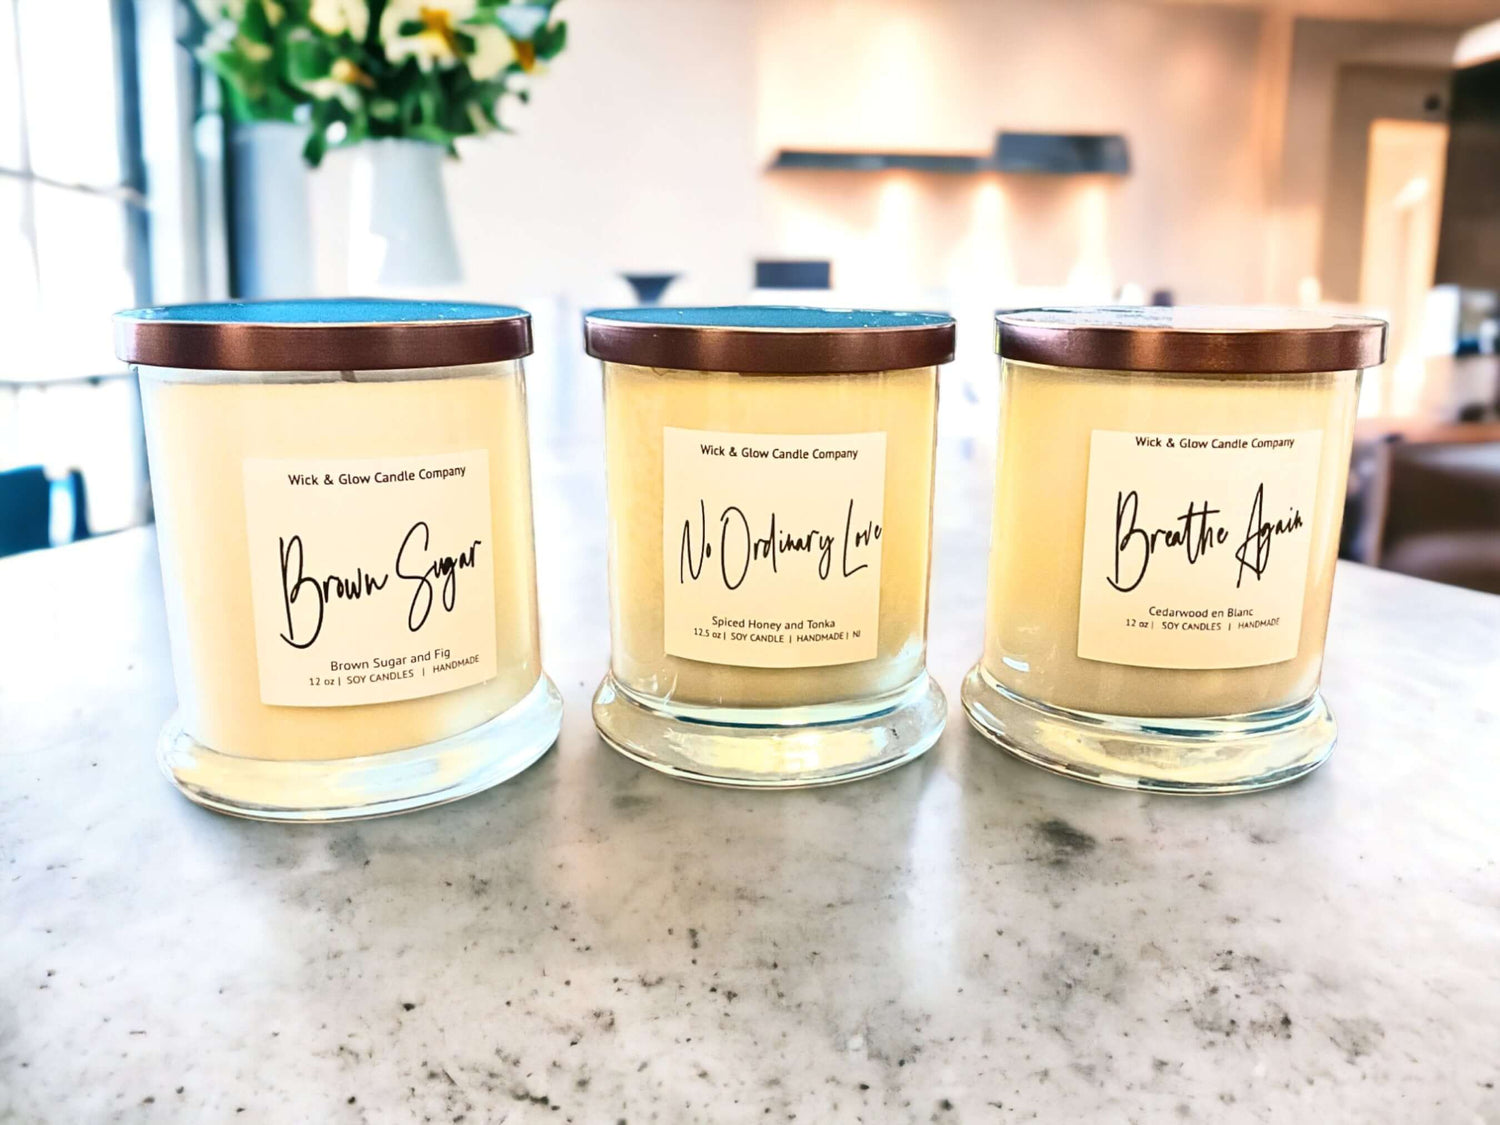 3 candles in clear jars with white labels and bronze lids